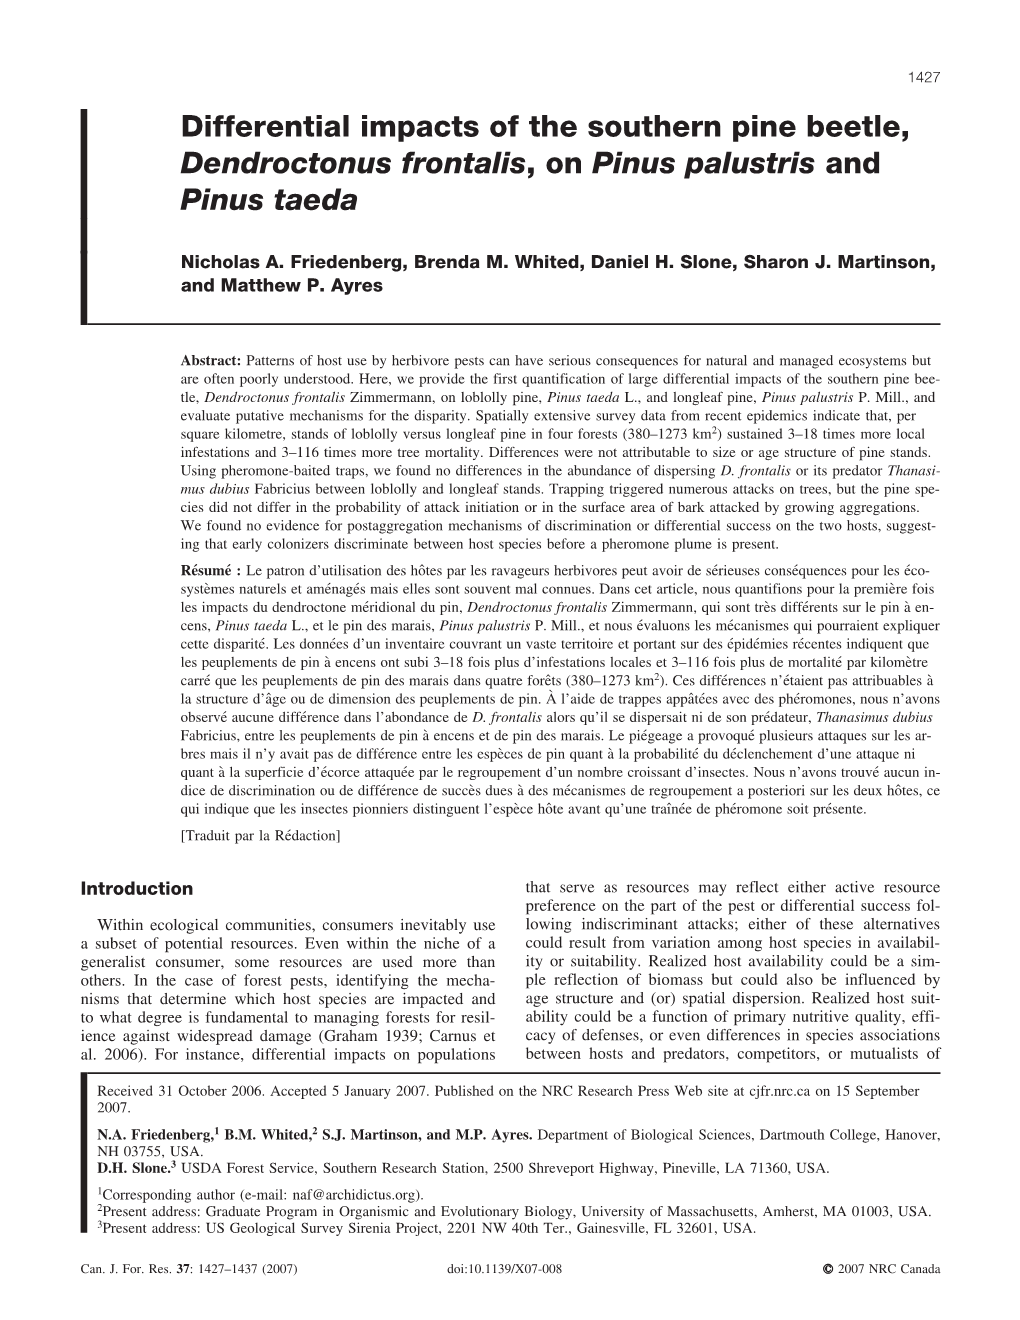 Differential Impacts of the Southern Pine Beetle, Dendroctonus Frontalis, on Pinus Palustris and Pinus Taeda